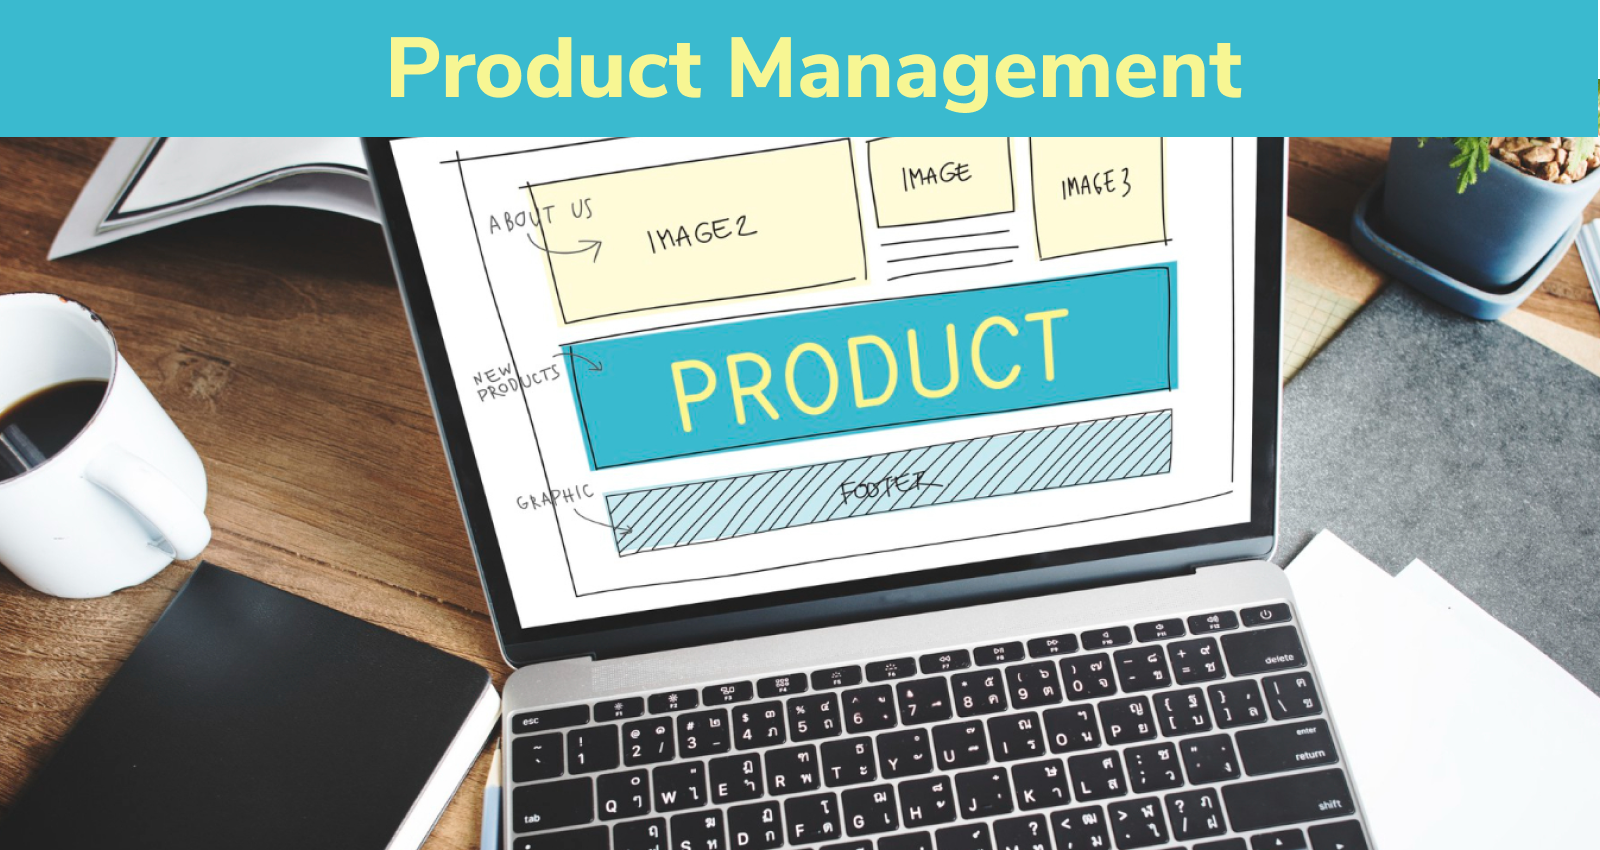 Data-driven approach, Product Management, Product Development, Data analysis in Product Management